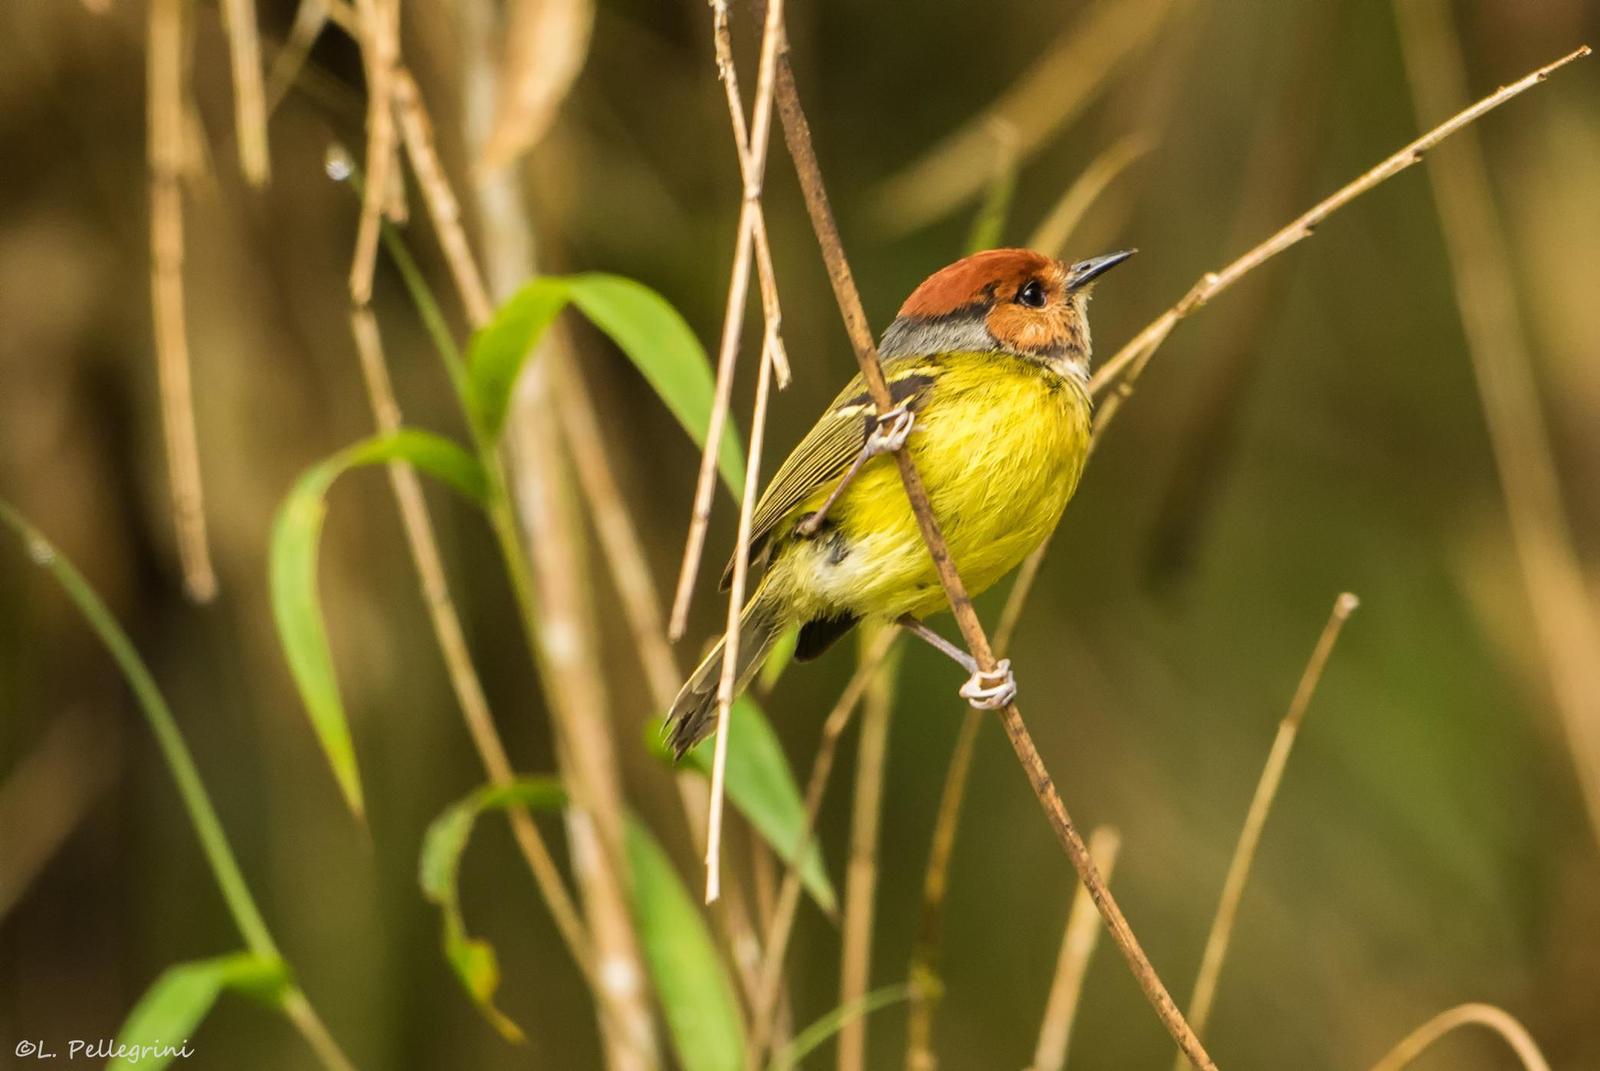 Rufous-crowned Tody-Flycatcher Photo by Laurence Pellegrini